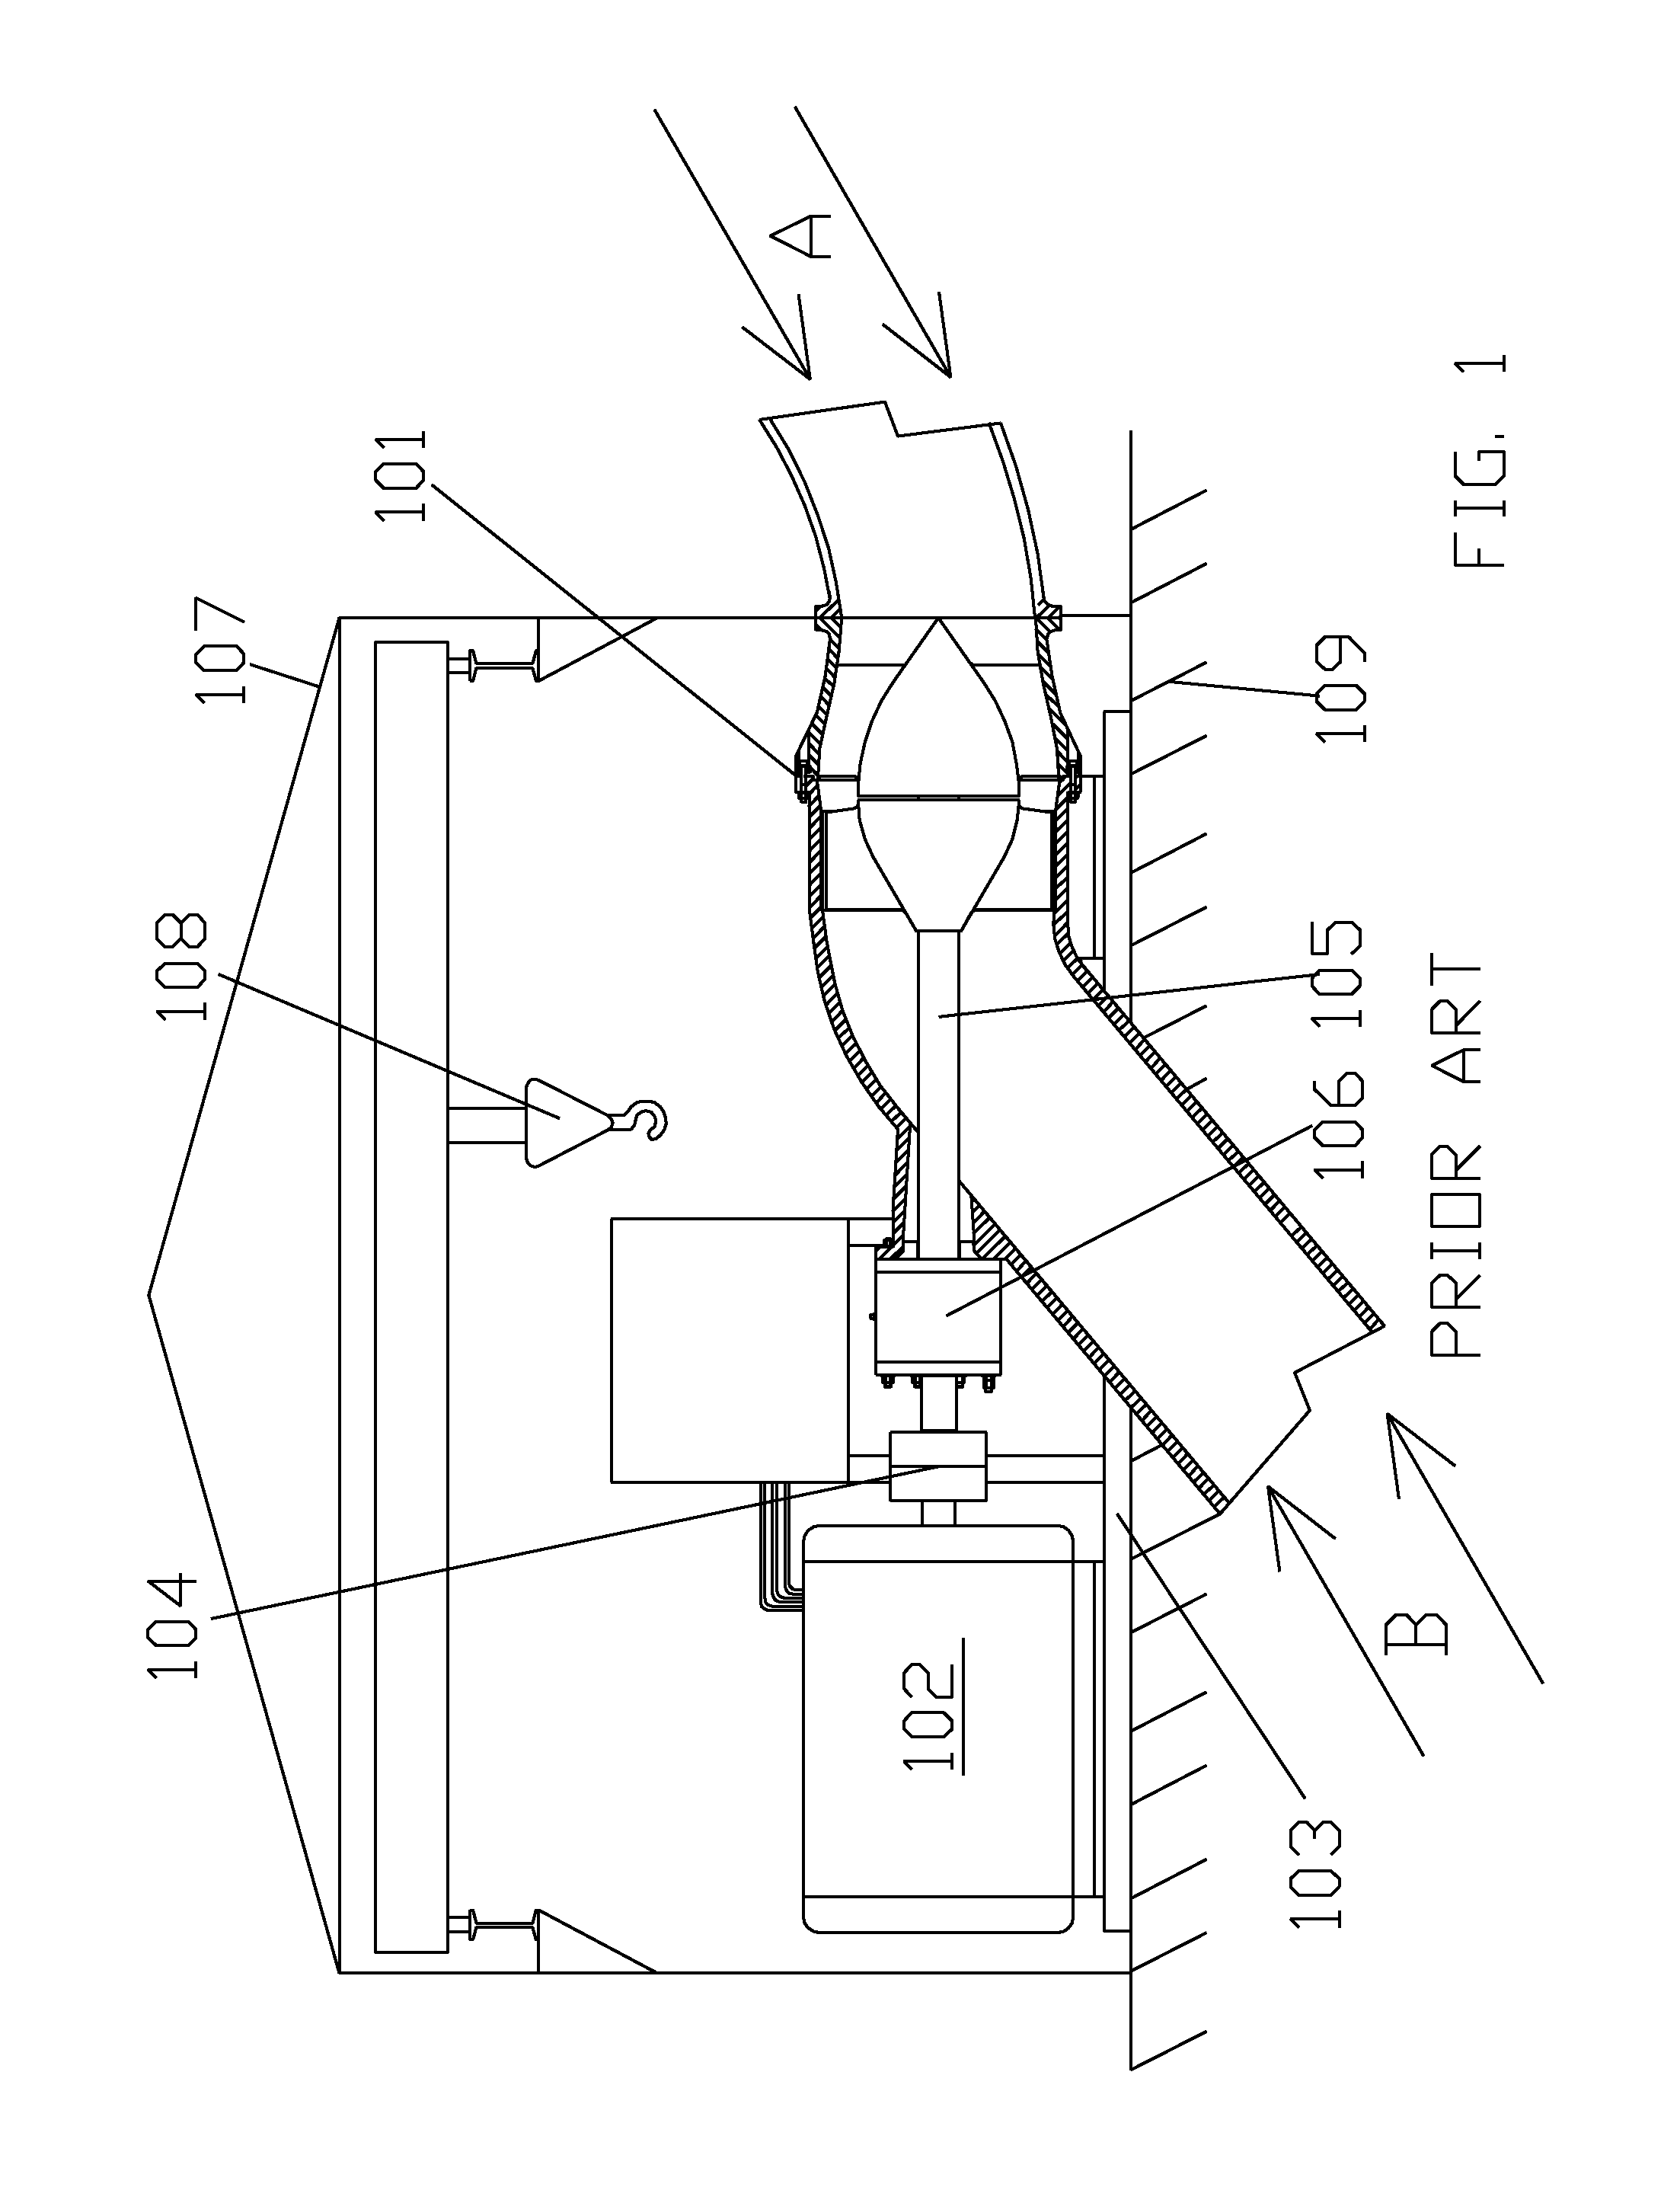 Power conversion and energy storage device